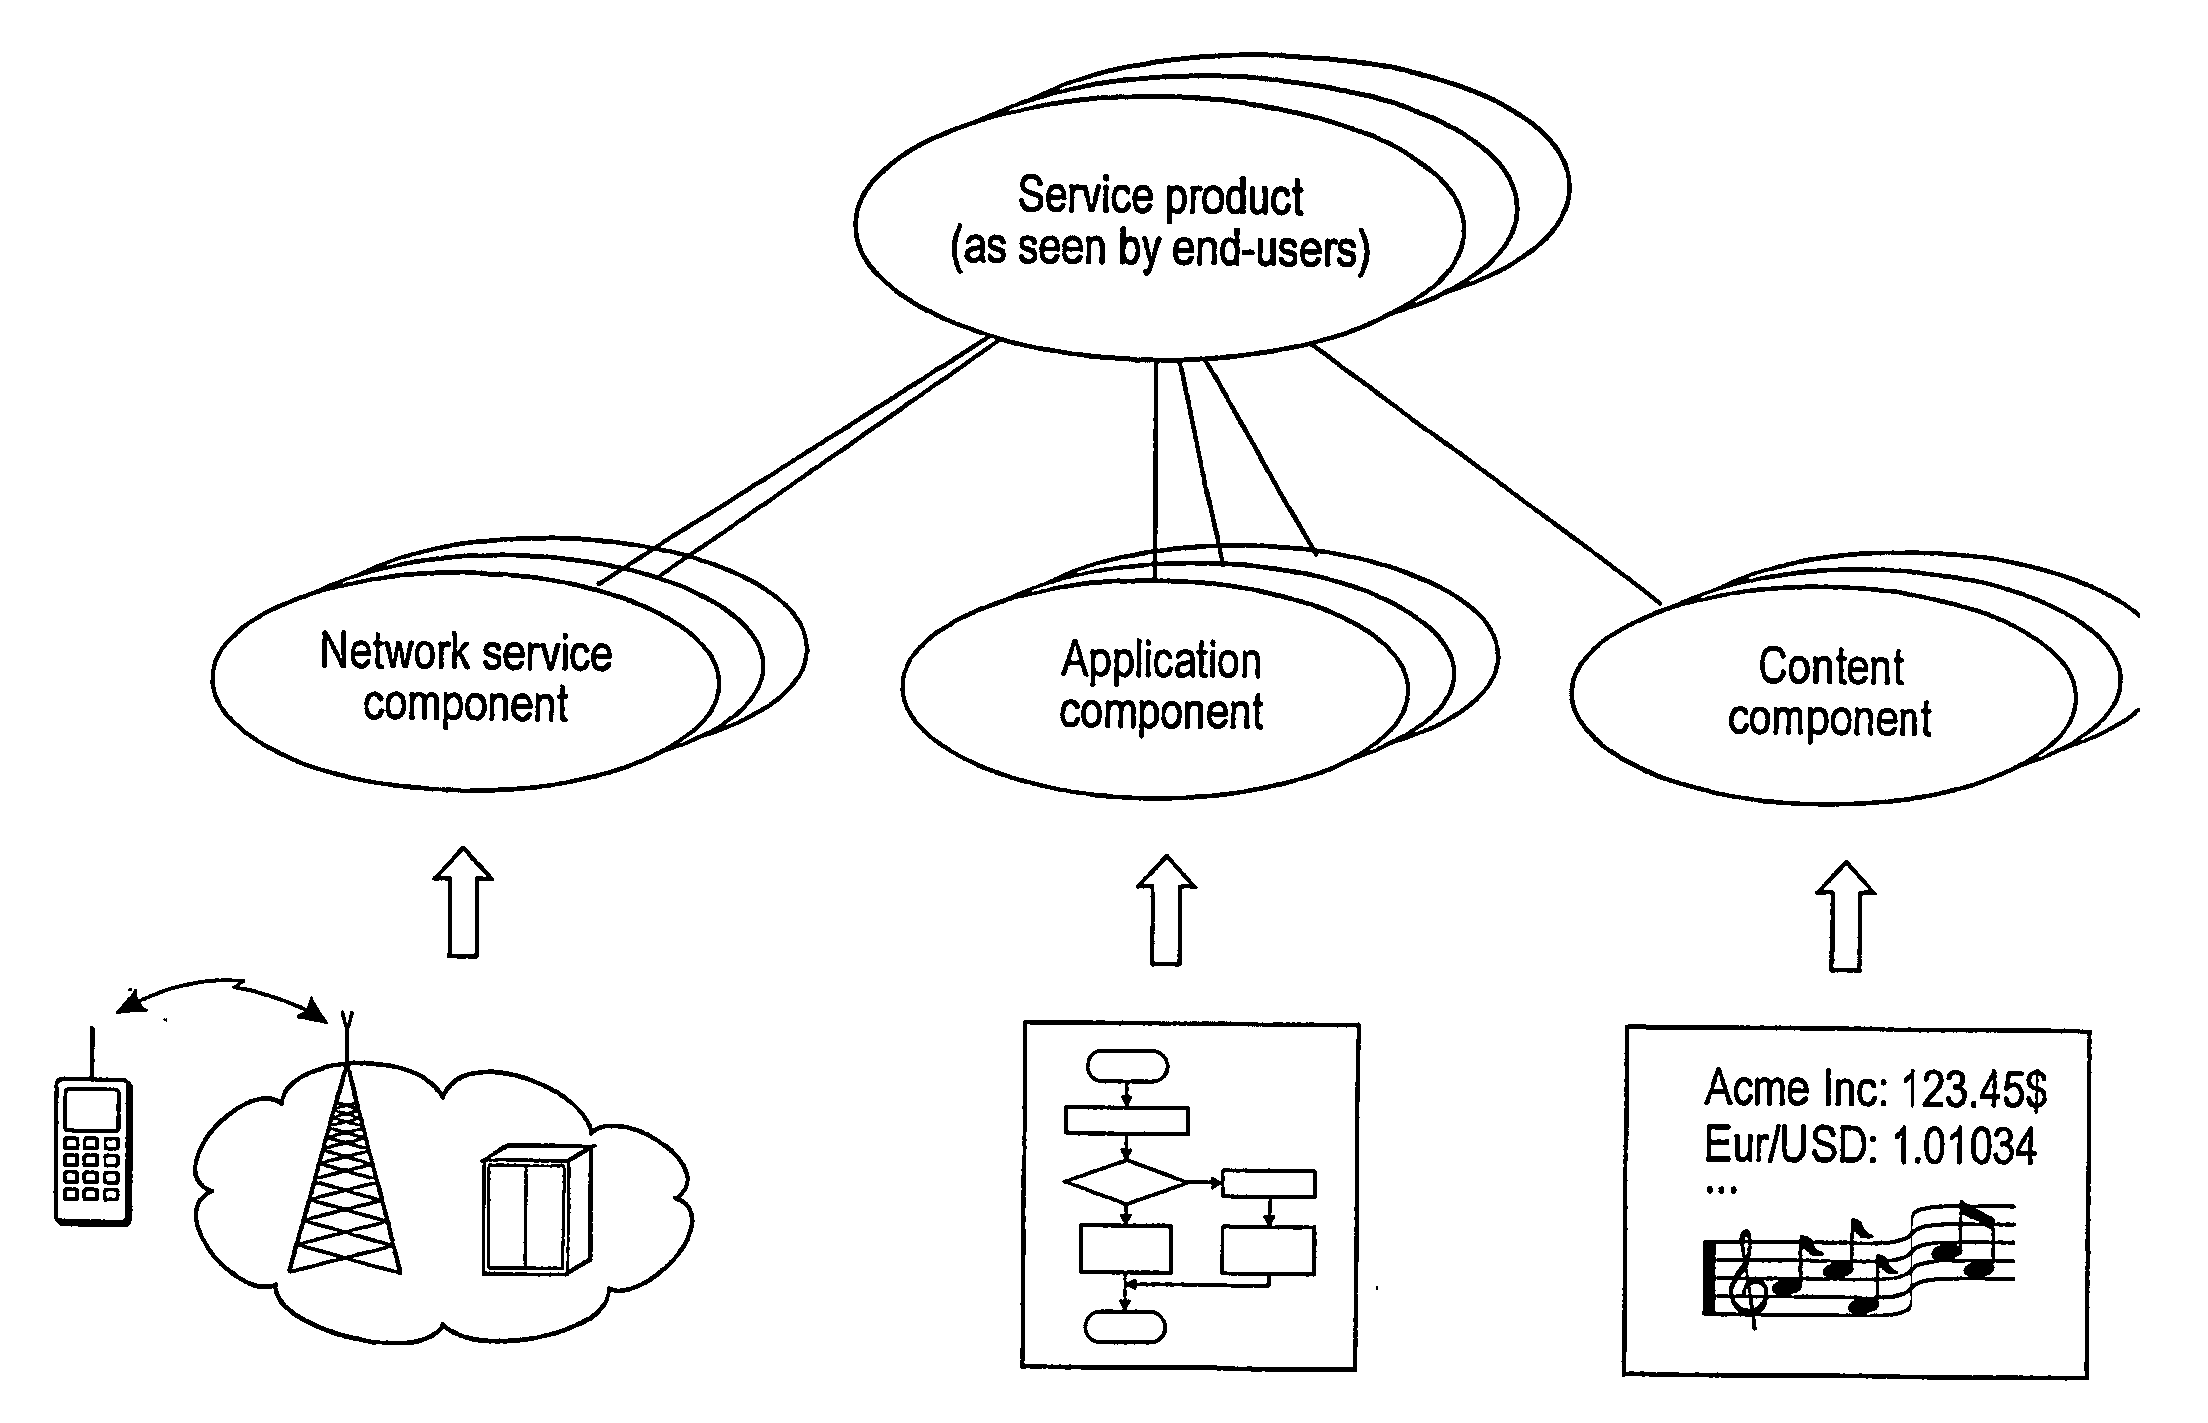 Management of service products in a network